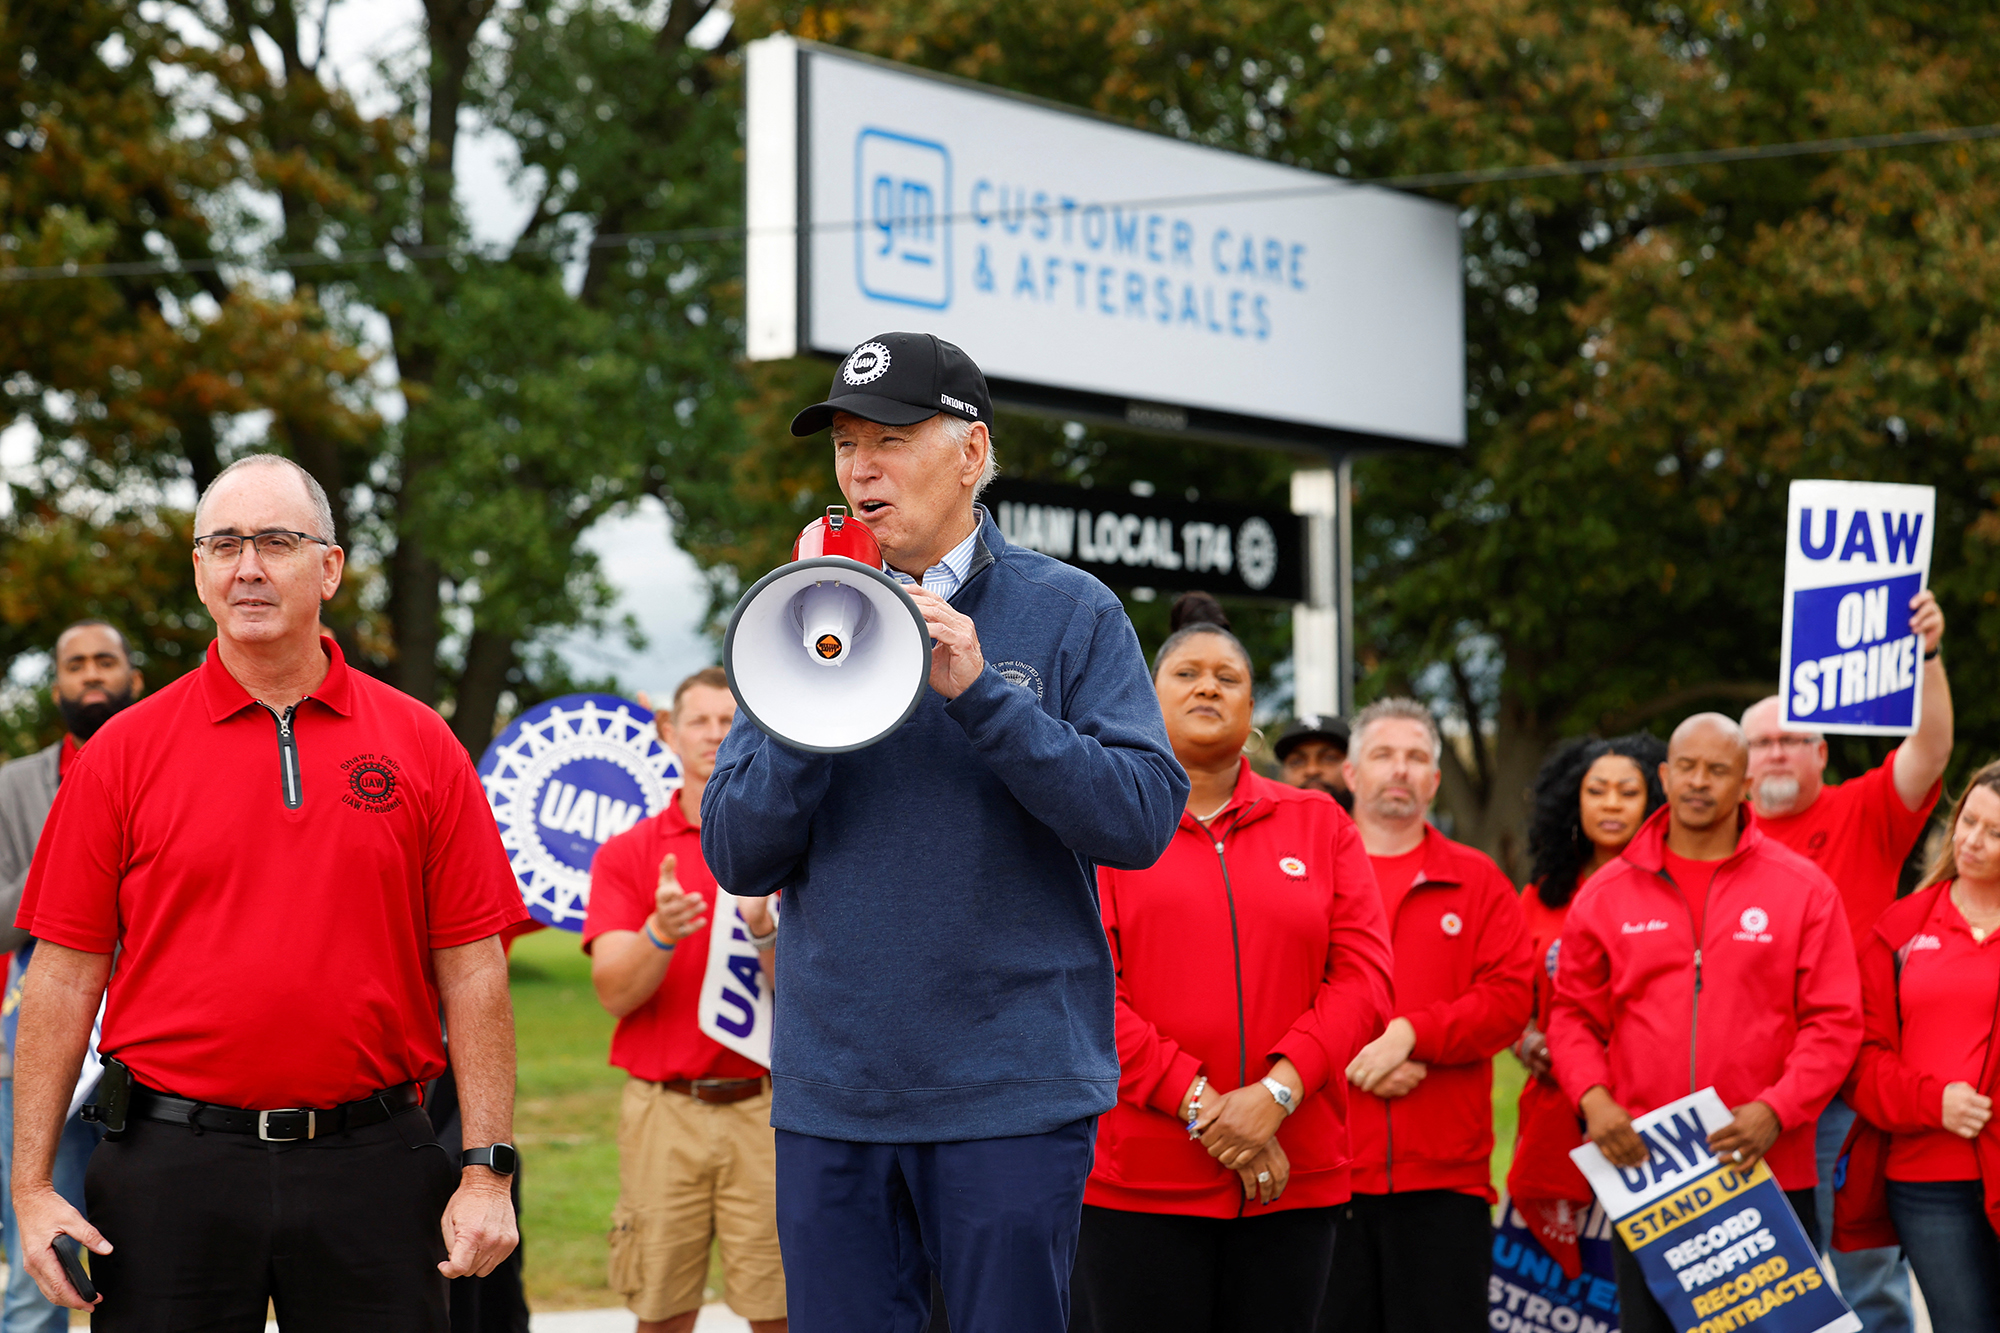 U.S. President Joe Biden speaks next to Shawn Fain, President of the United Auto Workers (UAW), as he joins striking members of the United Auto Workers (UAW) on the picket line outside the GM's Willow Run Distribution Center, in Bellville, Wayne County, Michigan today.